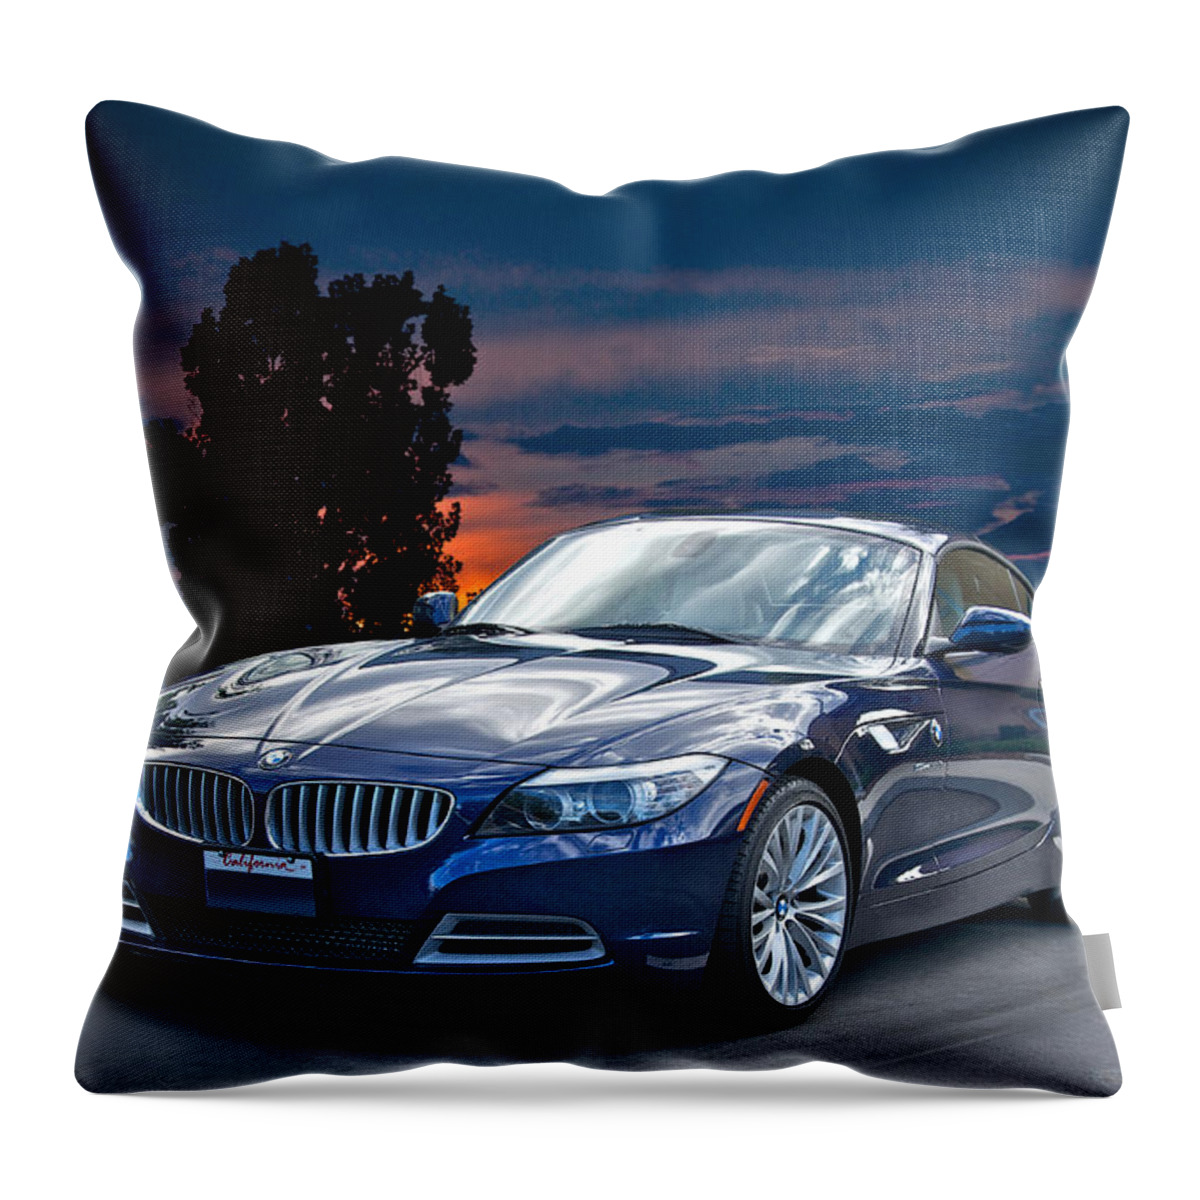 Auto Throw Pillow featuring the photograph 2013 Bmw Z4 by Dave Koontz